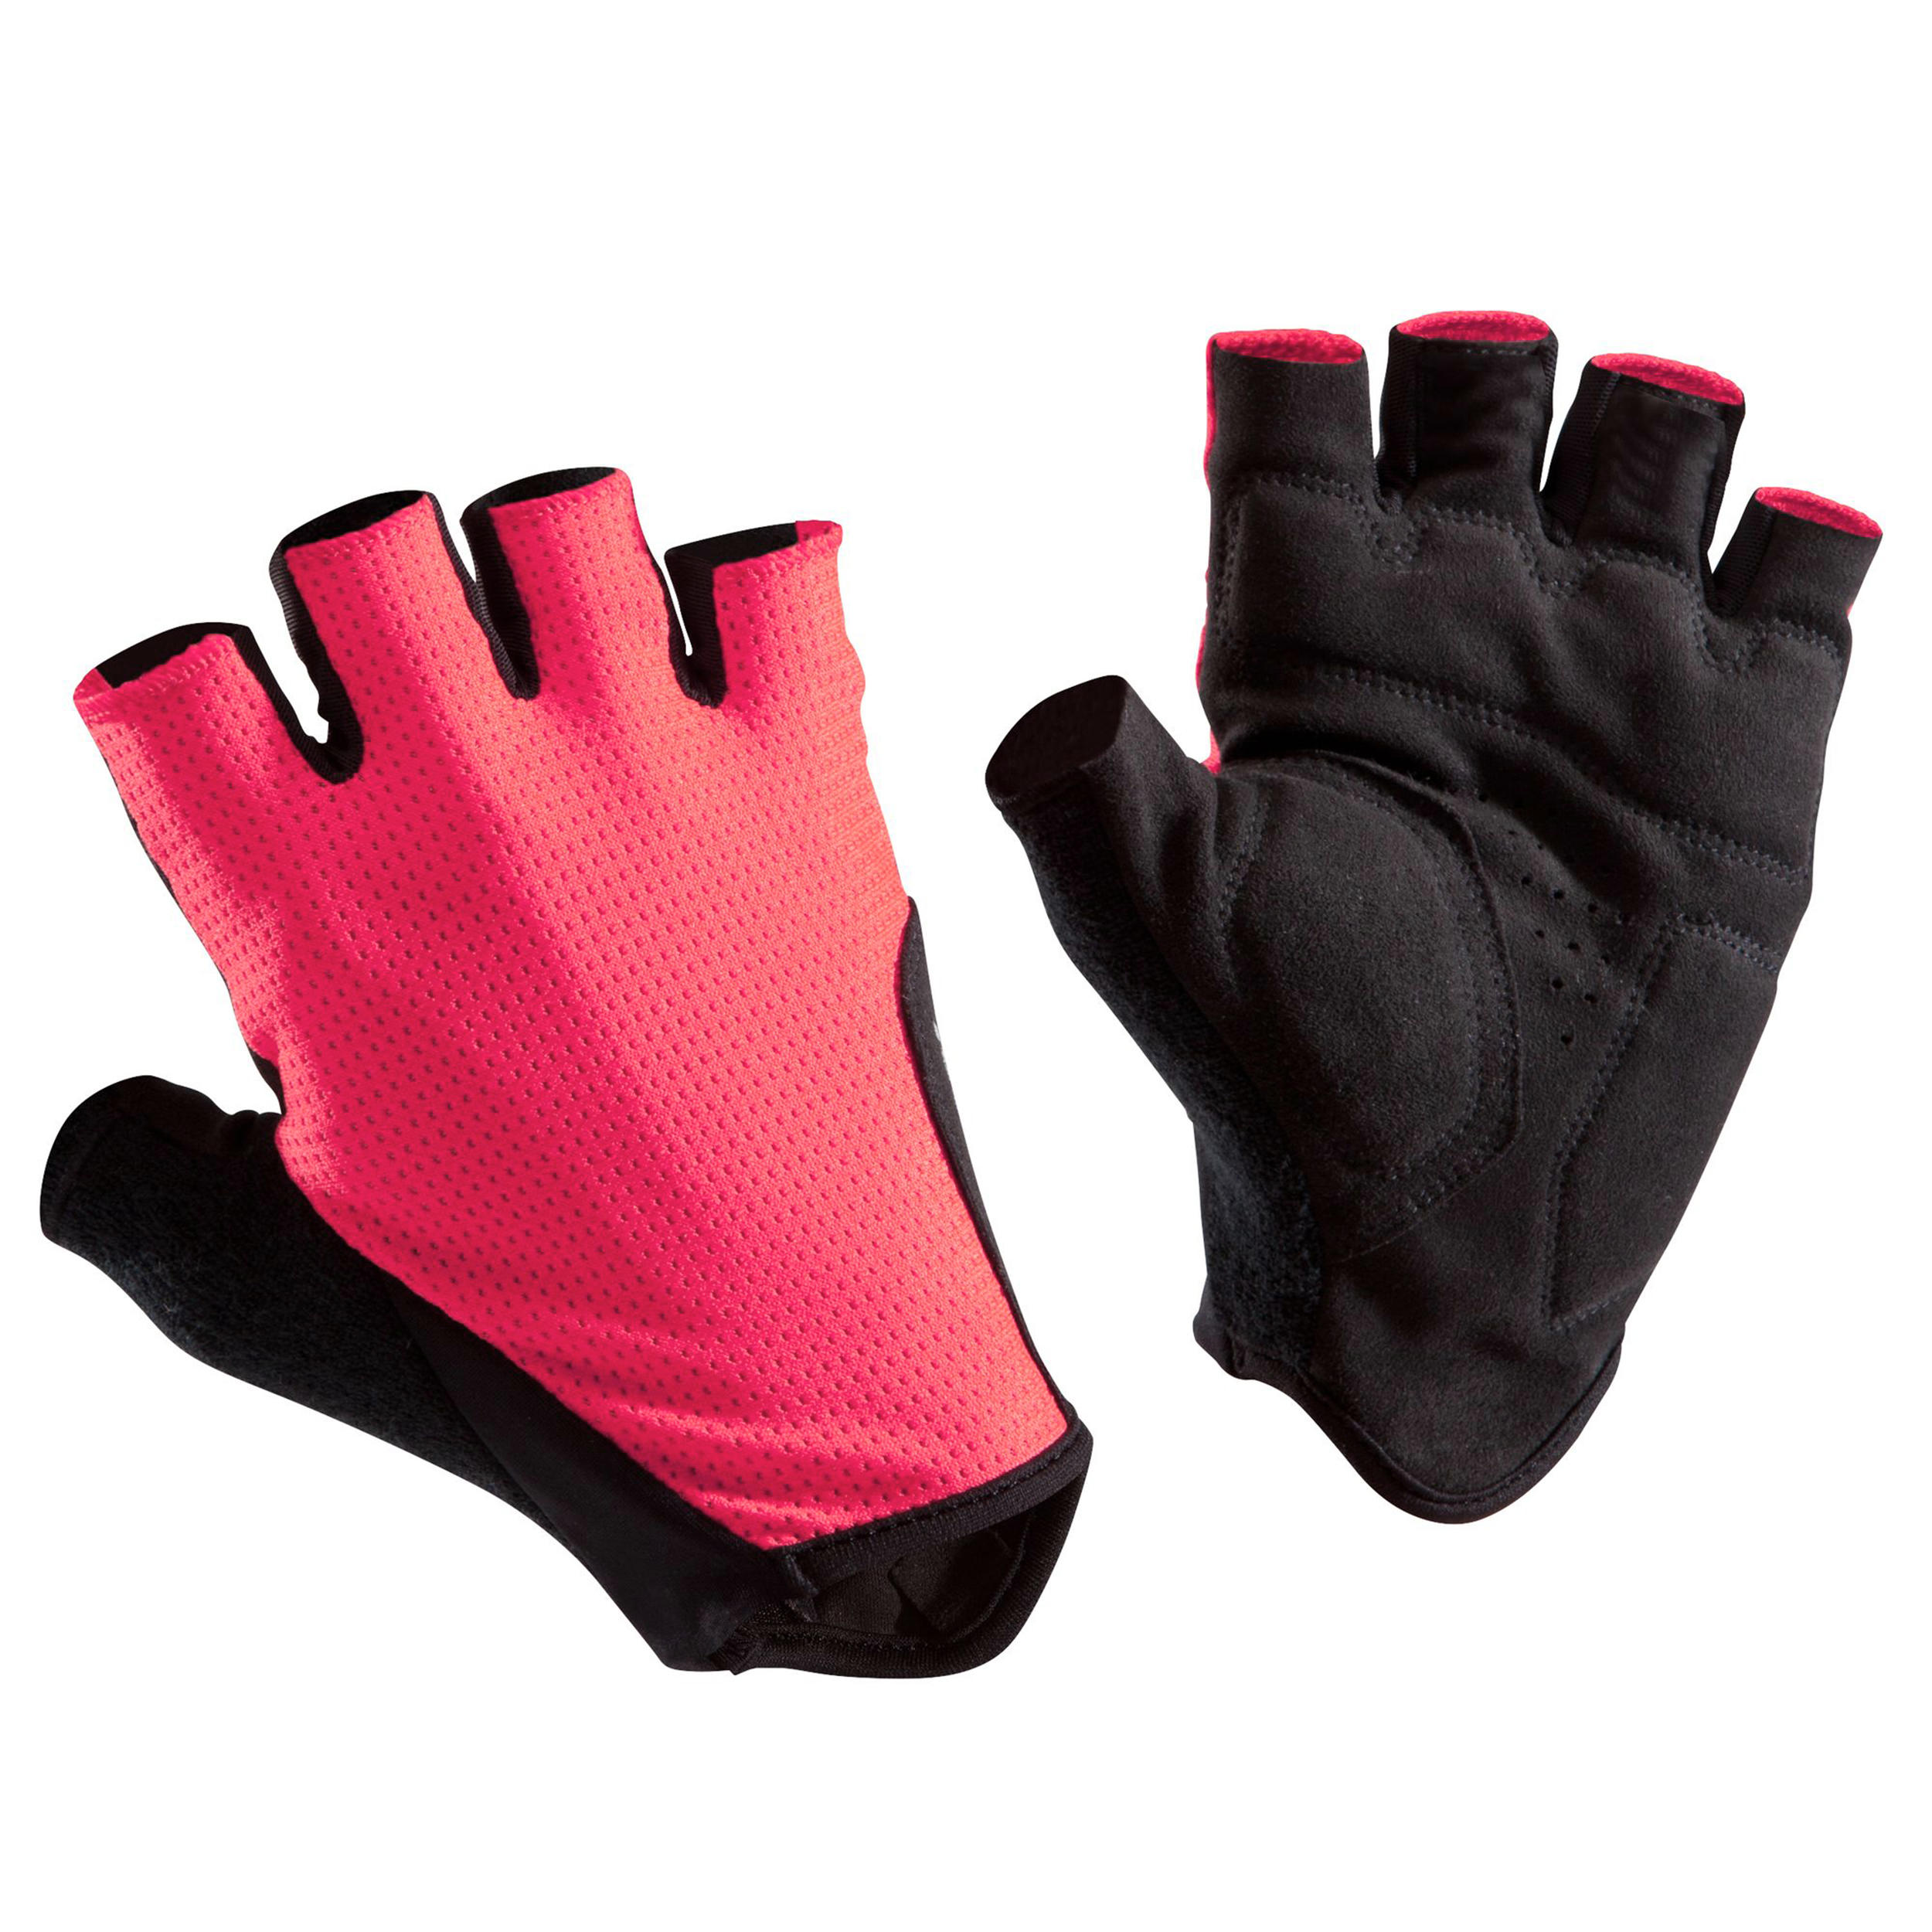 Roadr 500 Cycling Gloves - Neon Pink